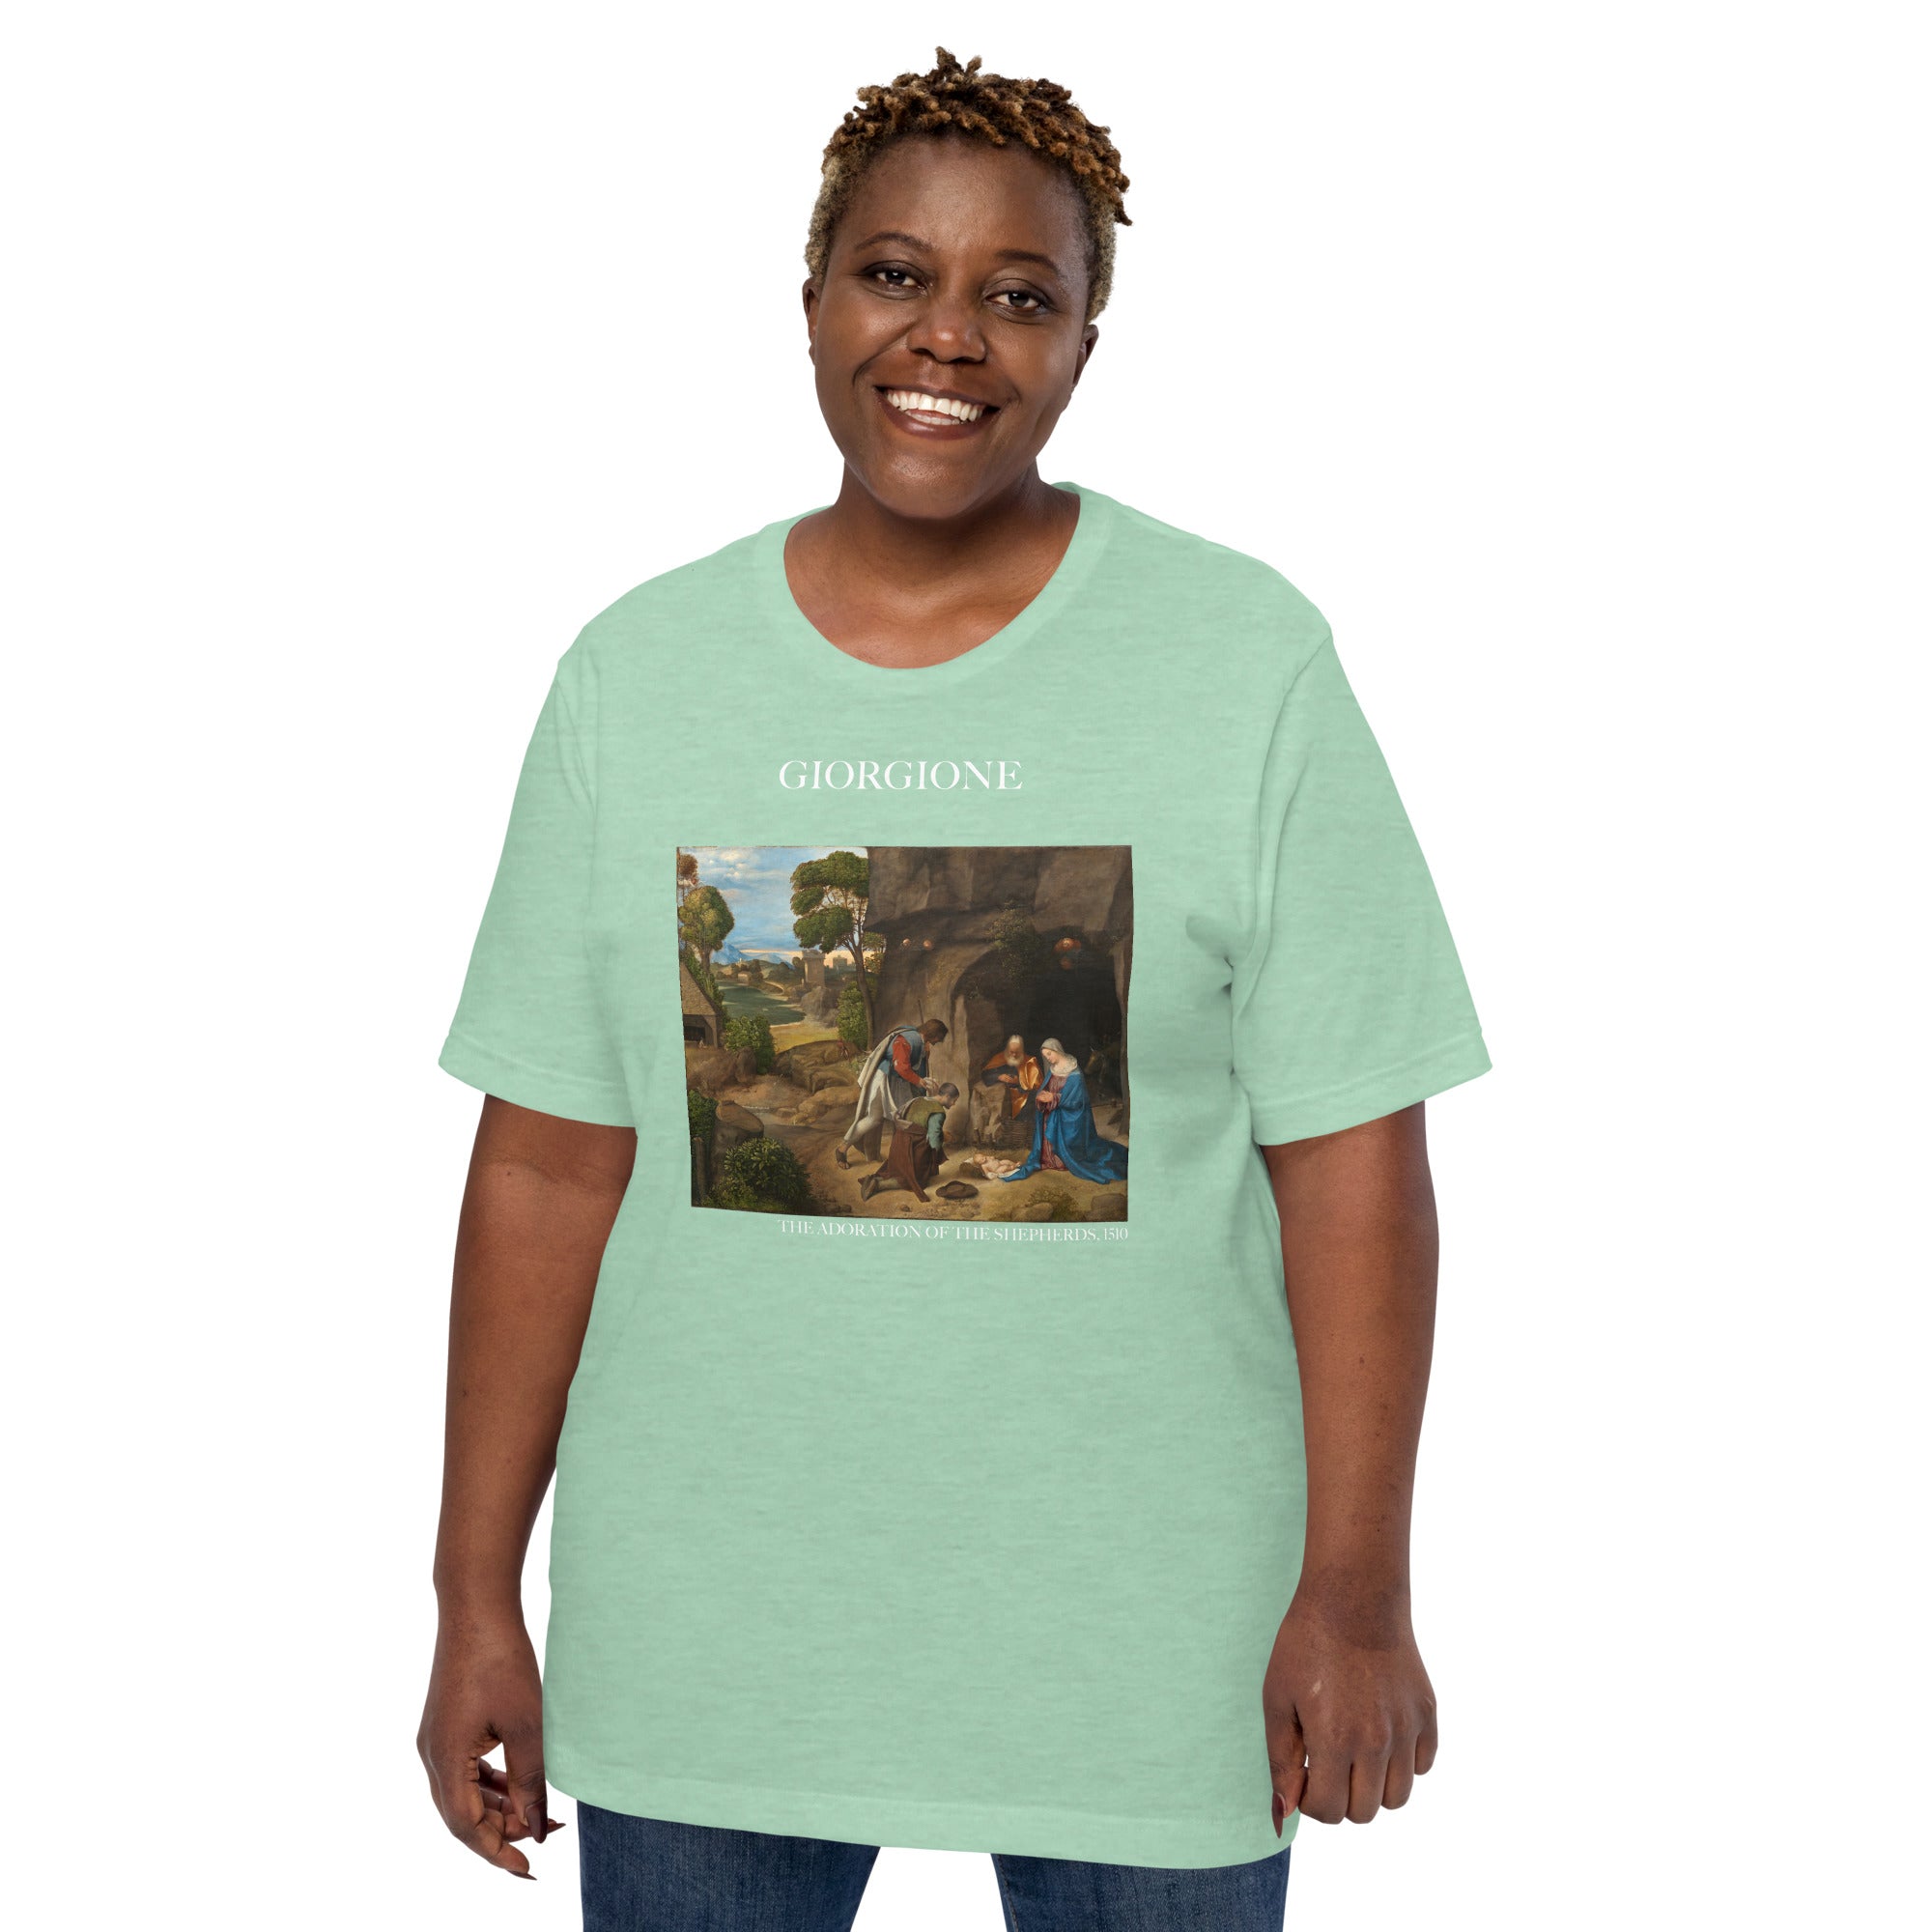 Giorgione 'The Adoration of the Shepherds' Famous Painting T-Shirt | Unisex Classic Art Tee